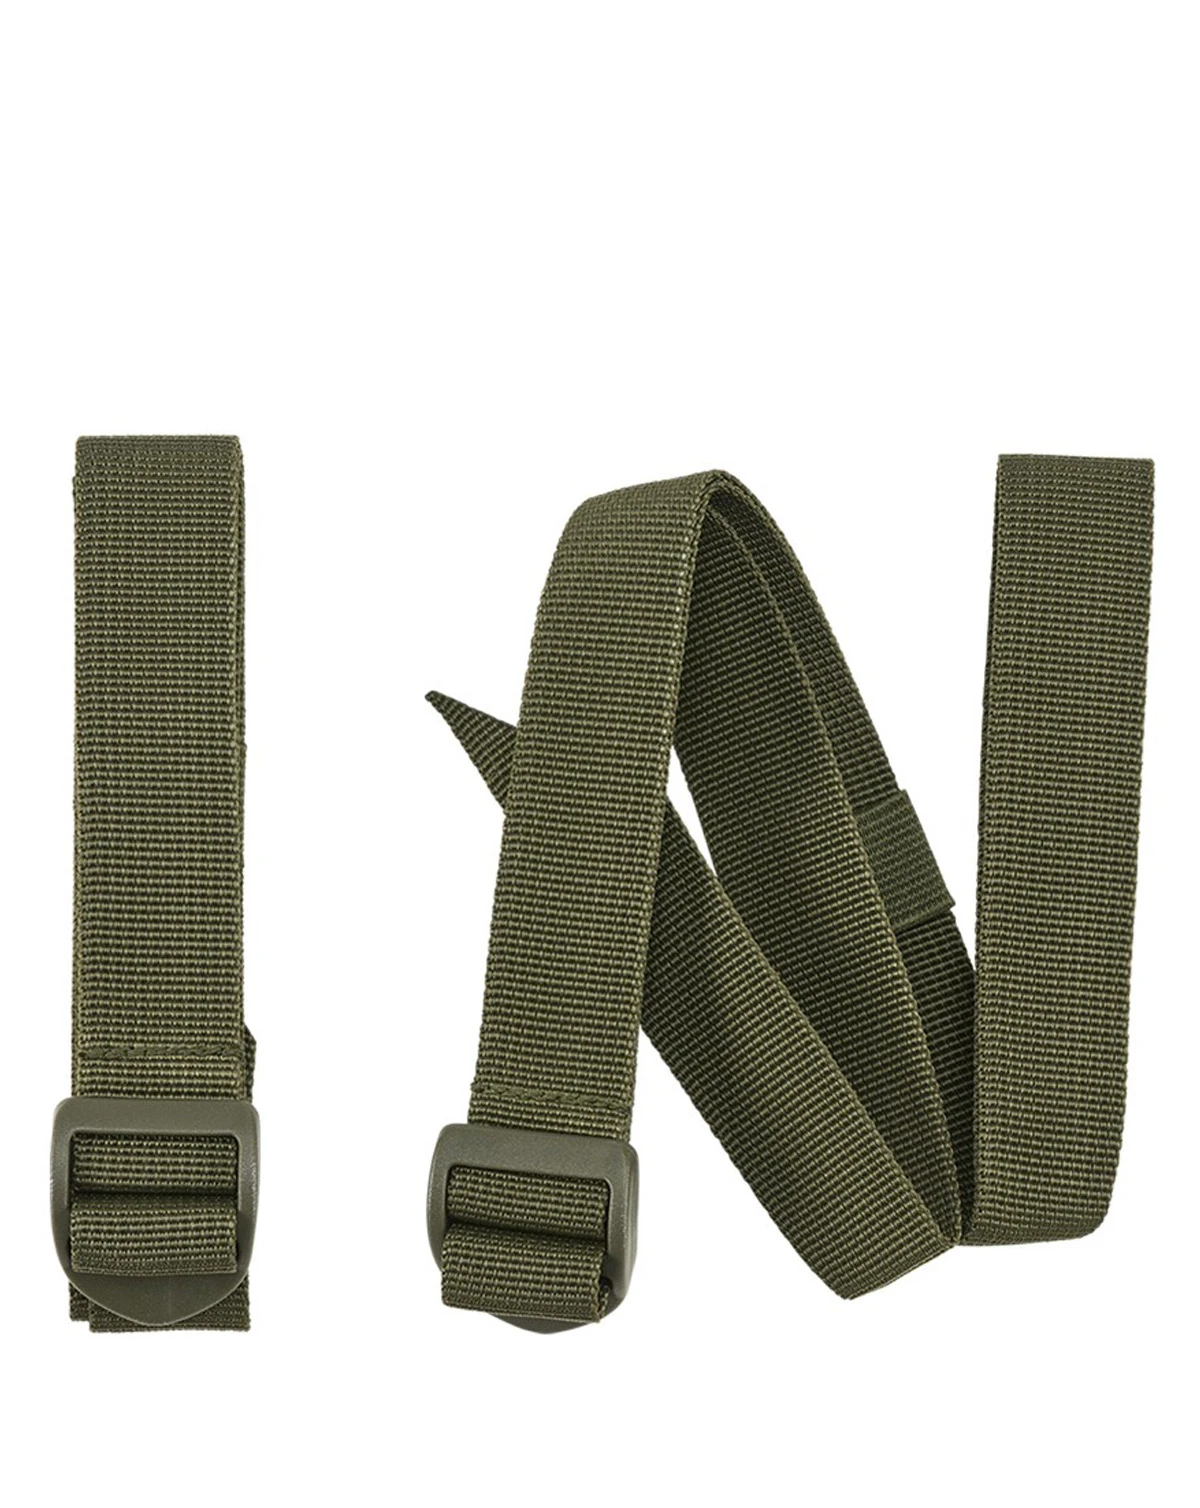 Buy Brandit Packing Straps 120 2 Pack | Money Back Guarantee | ARMY STAR